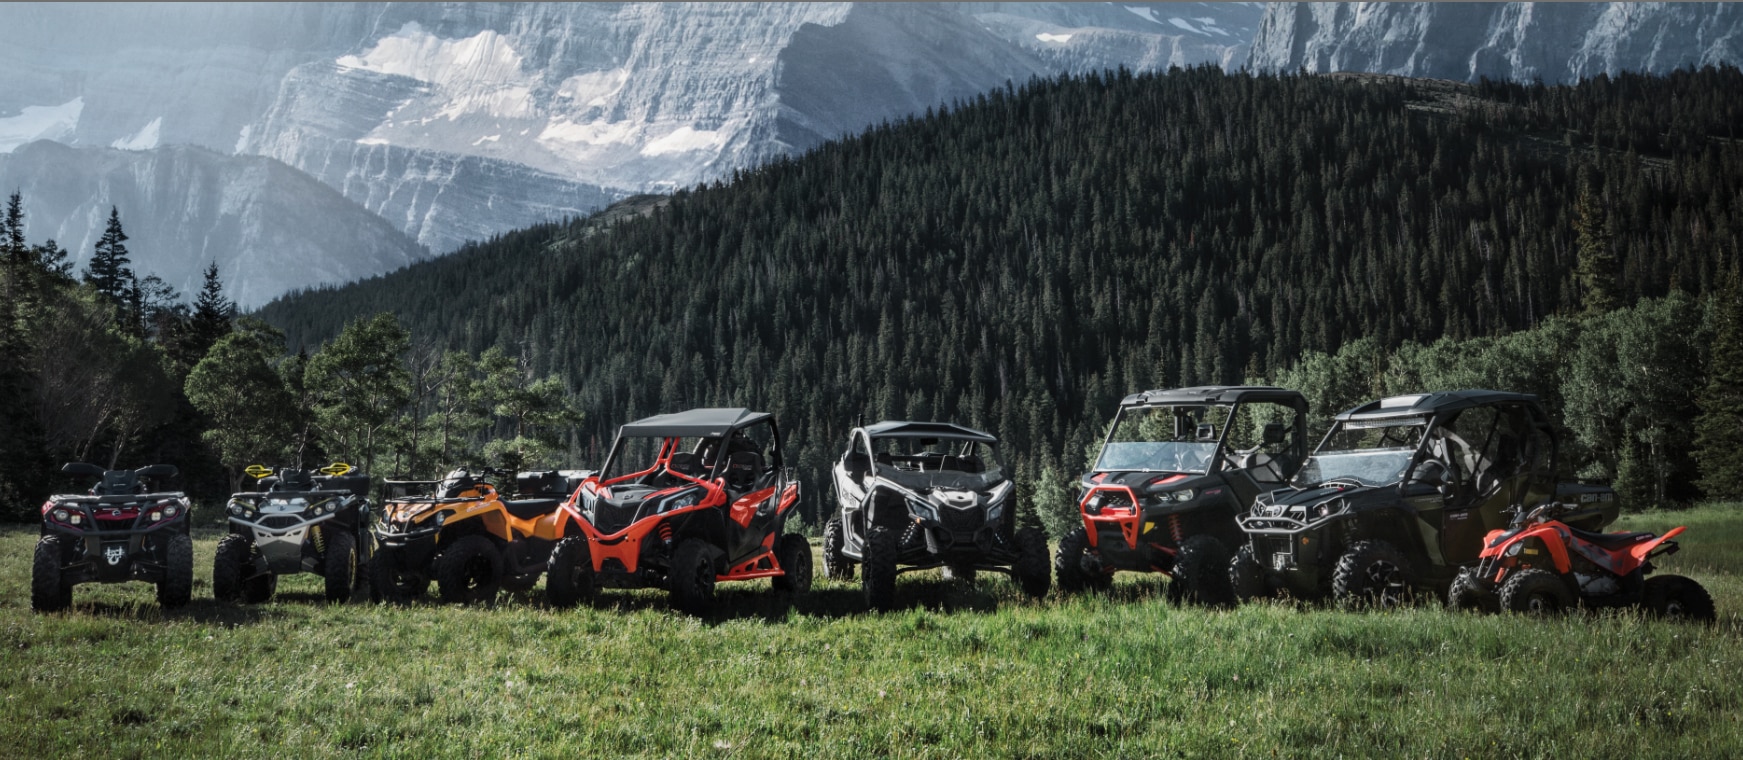 Can-Am Off-Road side-by-side και ATV lineup με ένα γραφικό φόντο